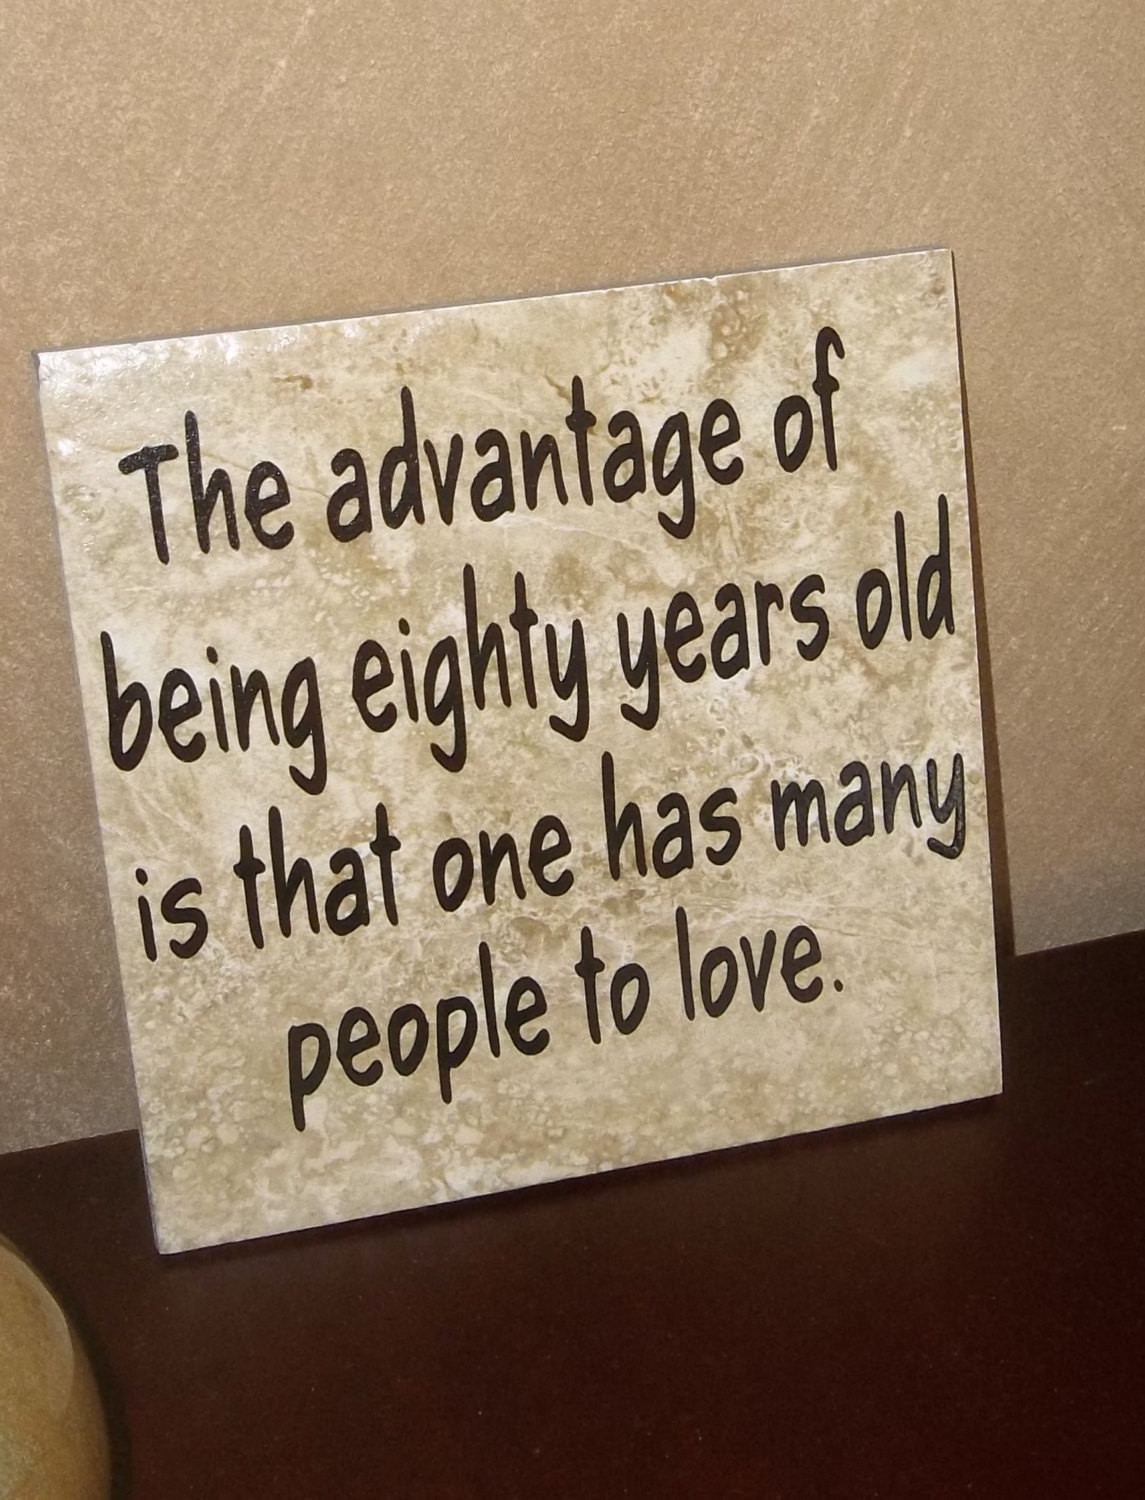 80 Years Old Birthday Quotes
 80th Birthday Decorative Tile